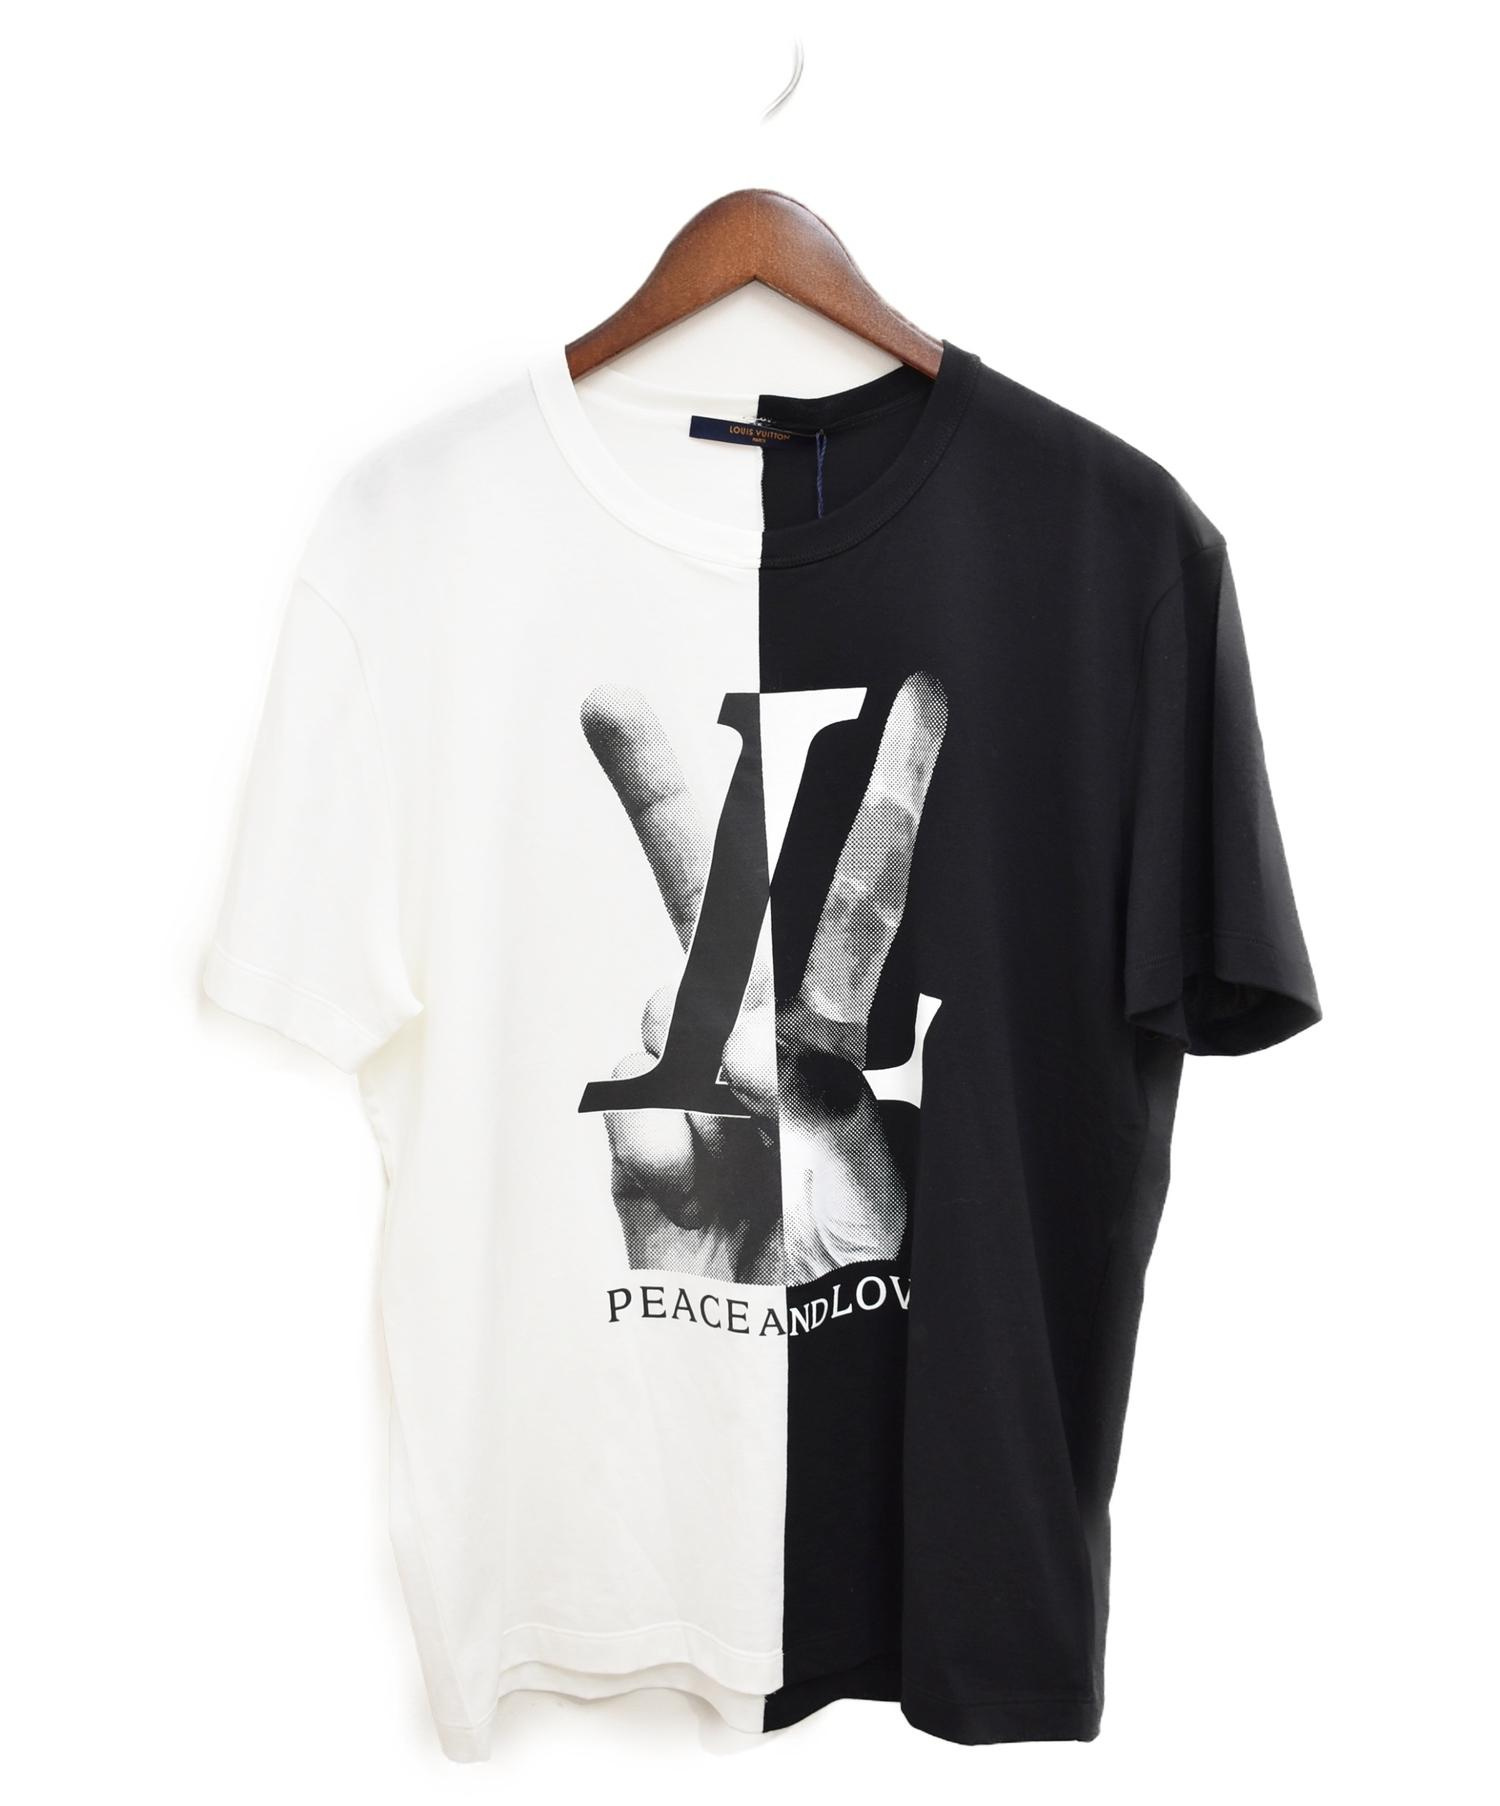 LOUIS VUITTON (ルイ・ヴィトン) PEACE AND LOVE Tシャツ ホワイト 